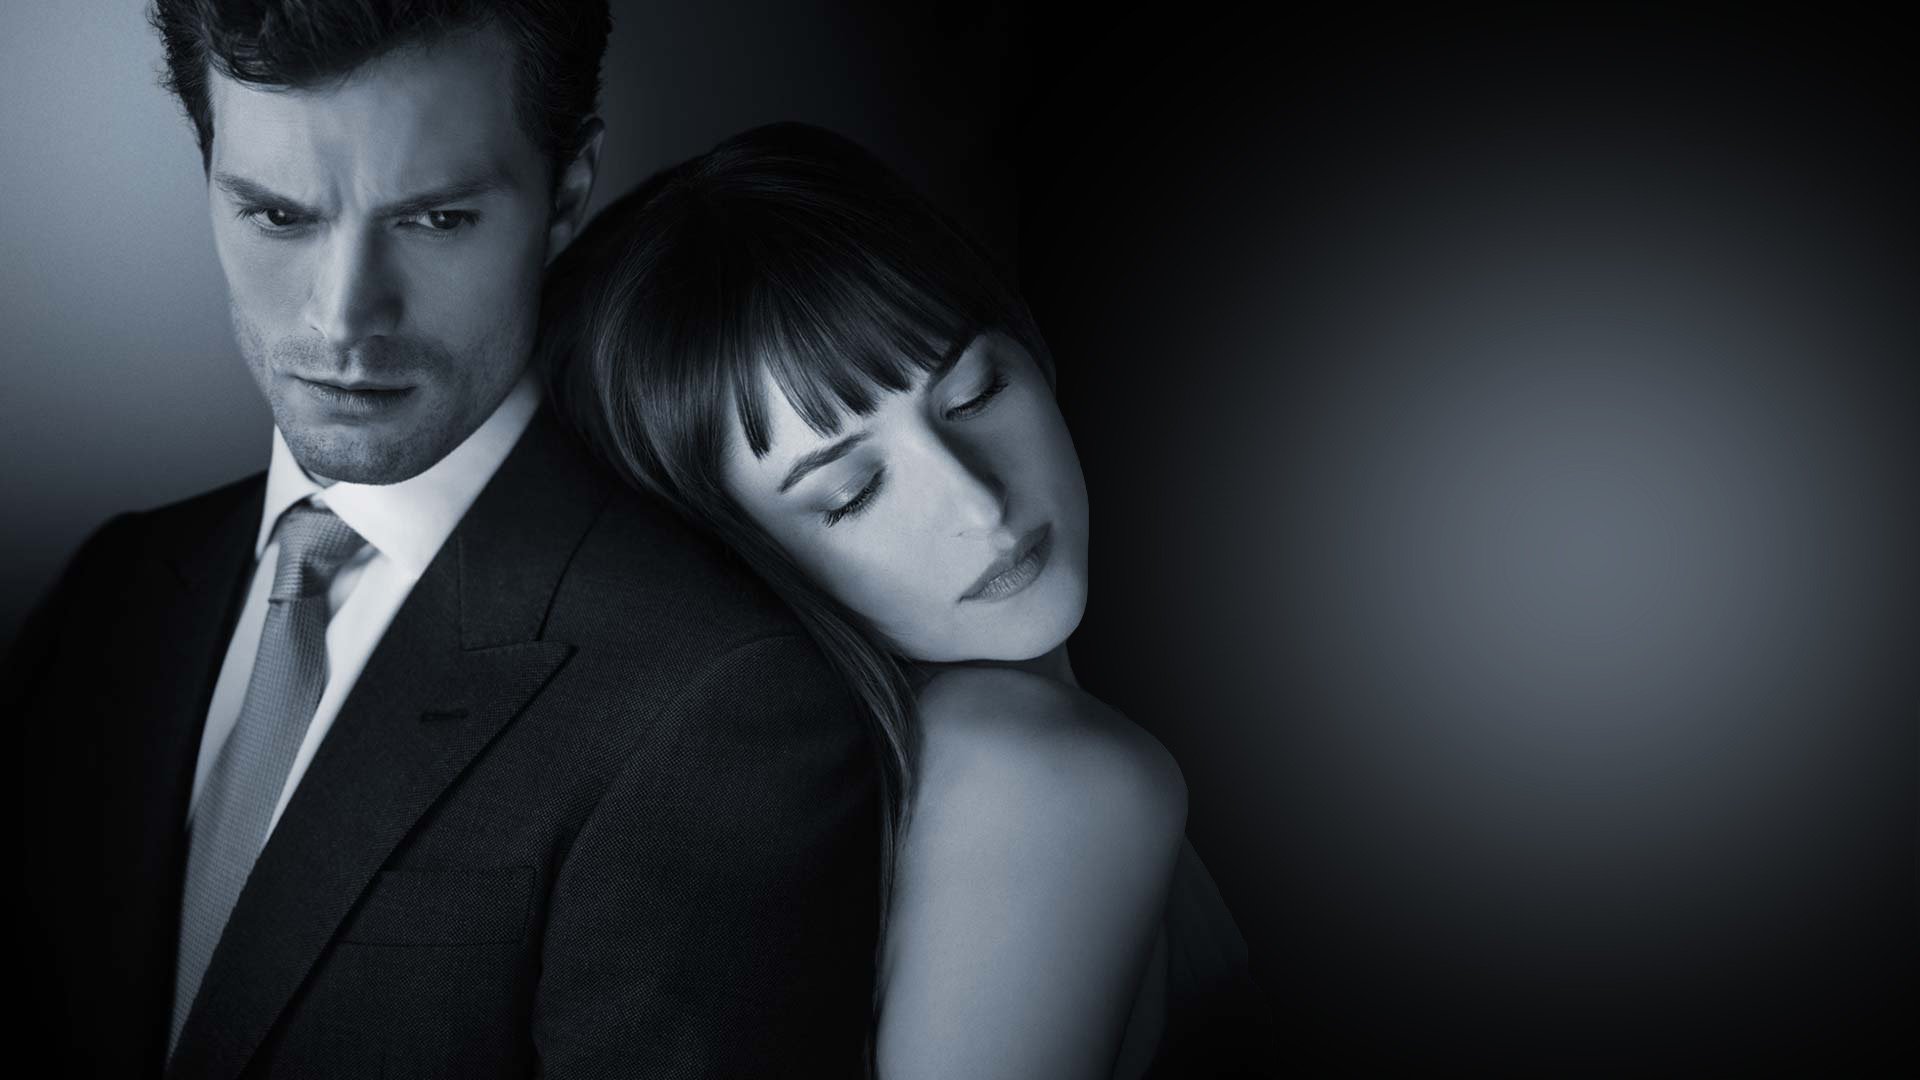 Movie Fifty Shades of Grey HD Wallpaper Background Image. 